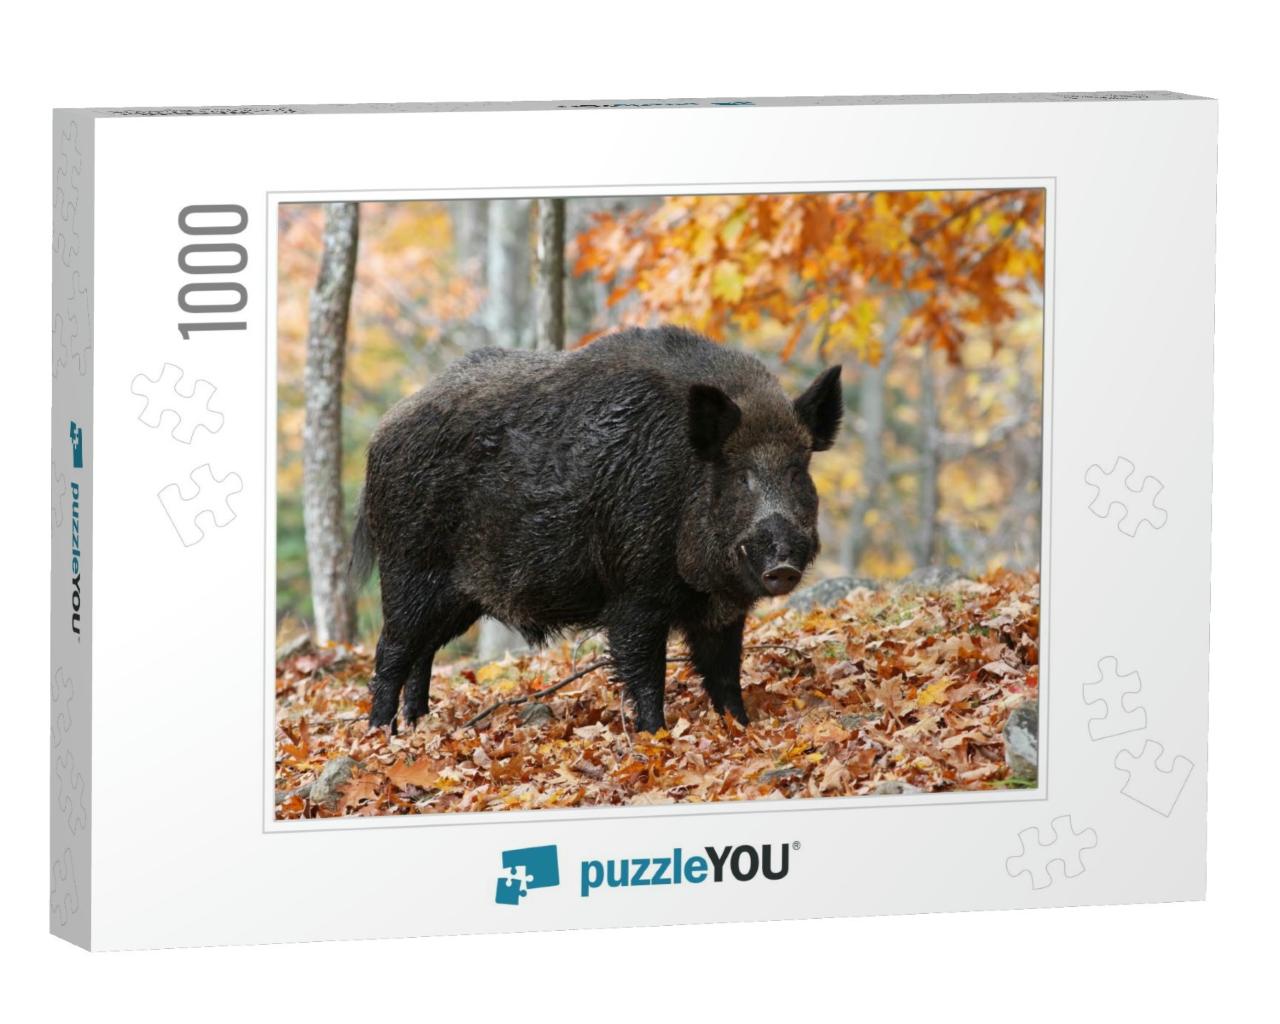 Male Wild-Boar in Autumn Forest... Jigsaw Puzzle with 1000 pieces